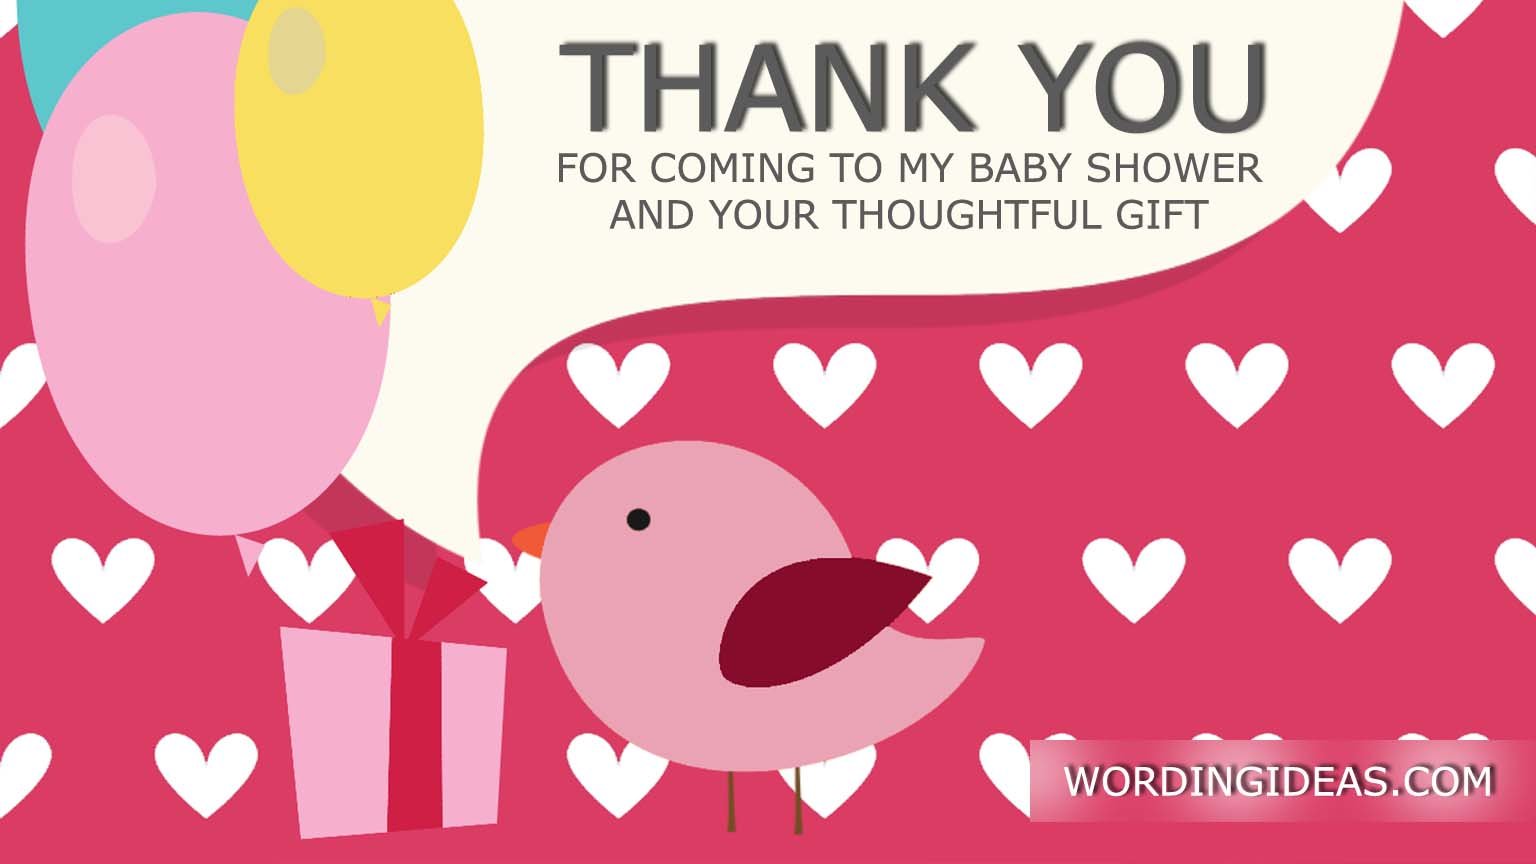 THANK-YOU-FOR-BABY-SHOWER-IMAGE